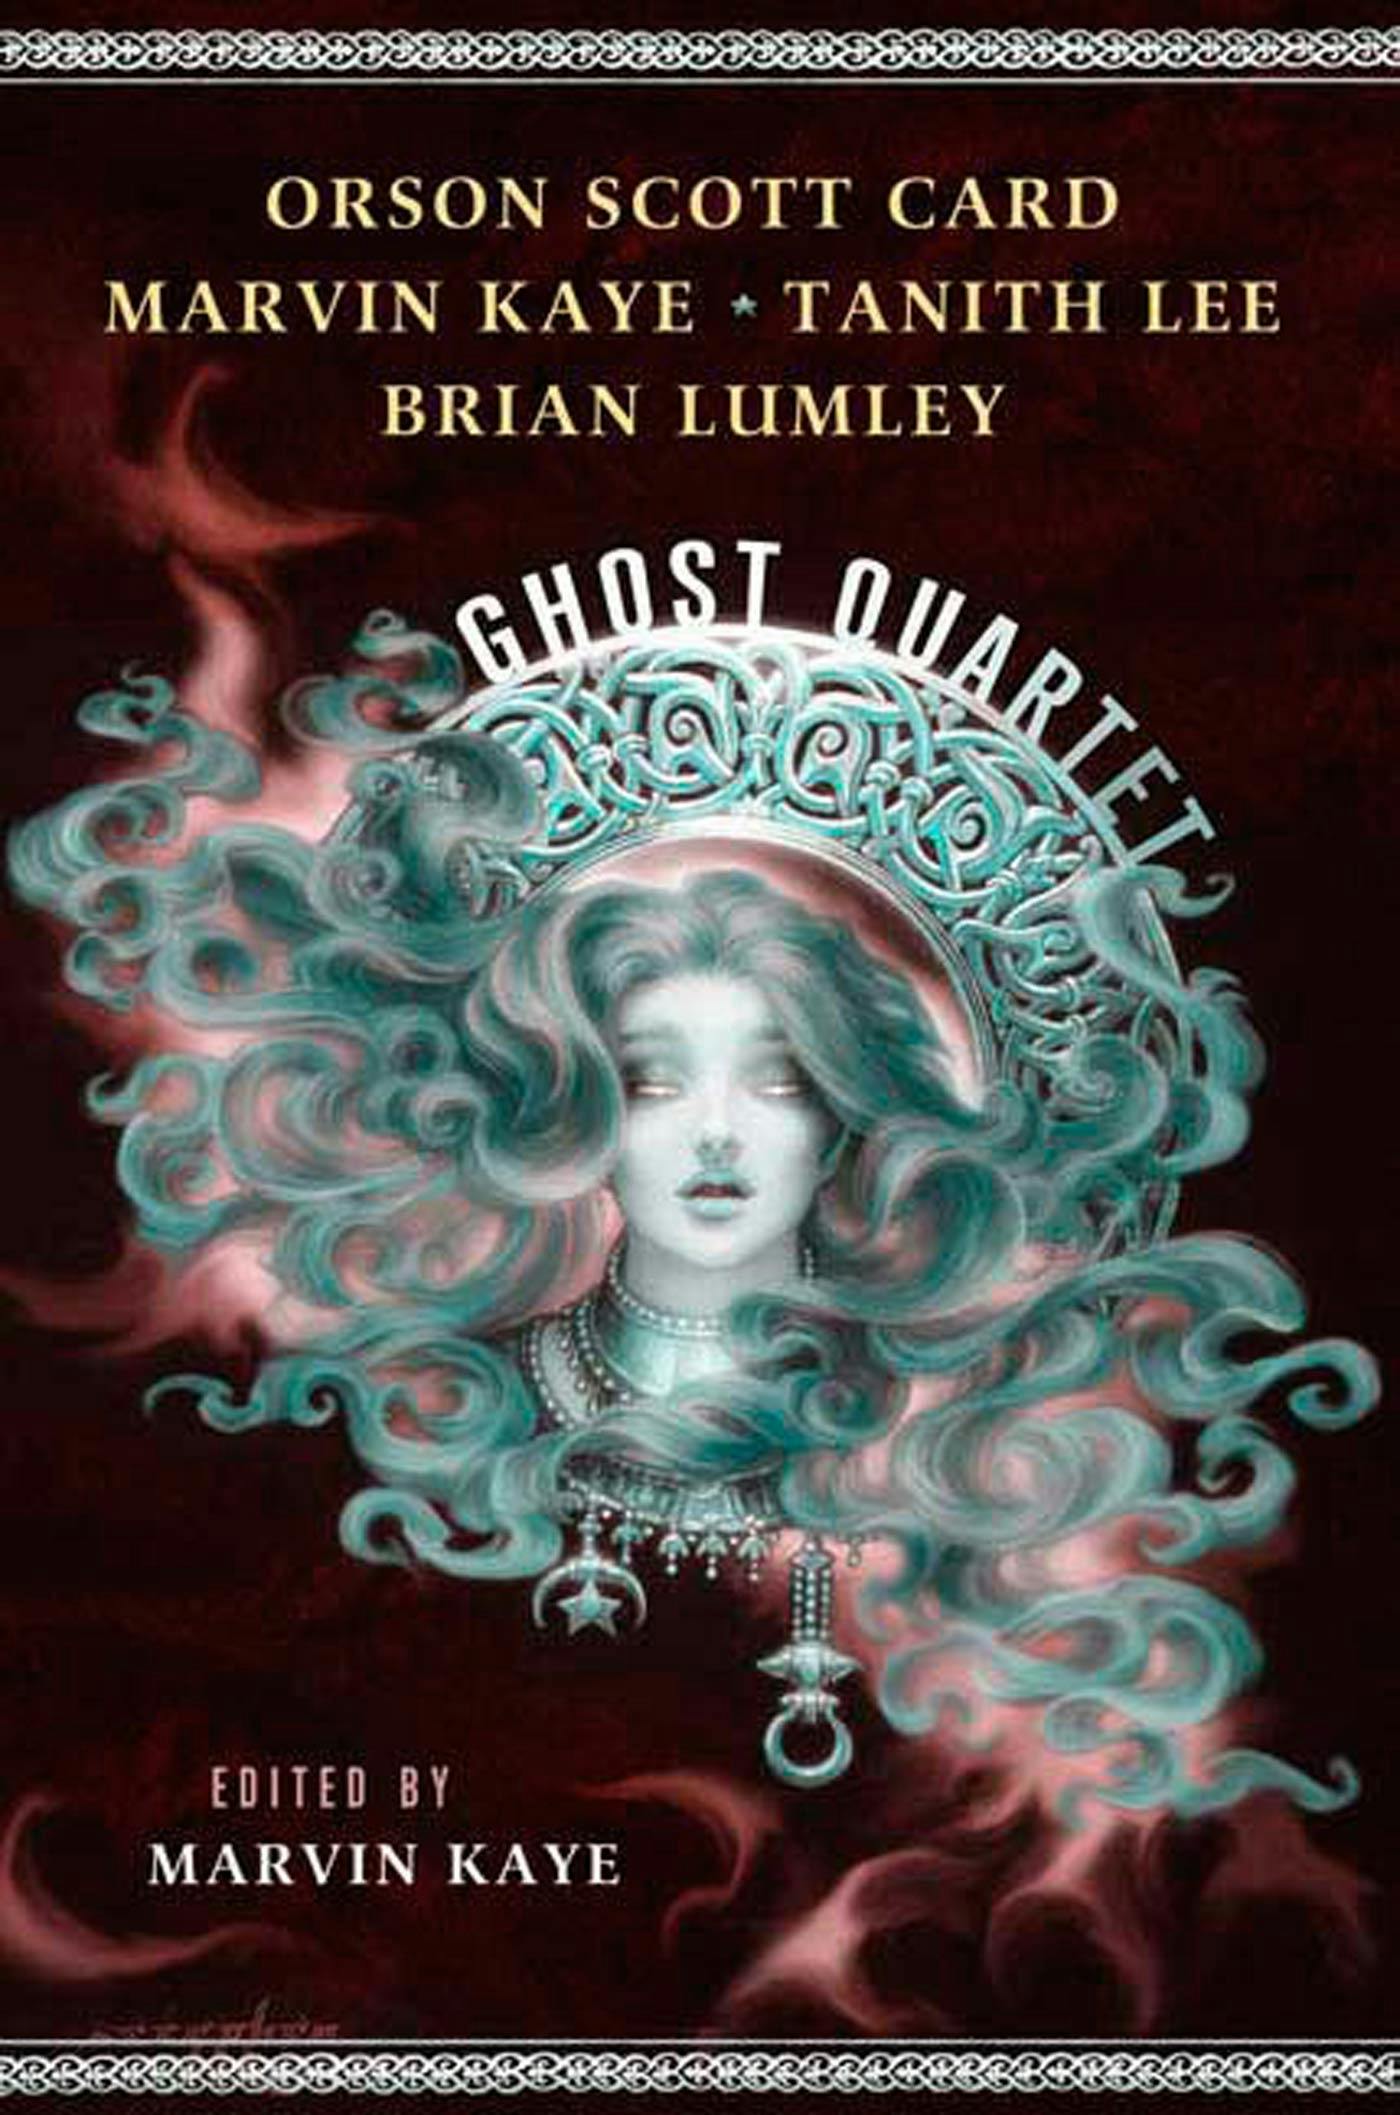 Cover for the book titled as: The Ghost Quartet